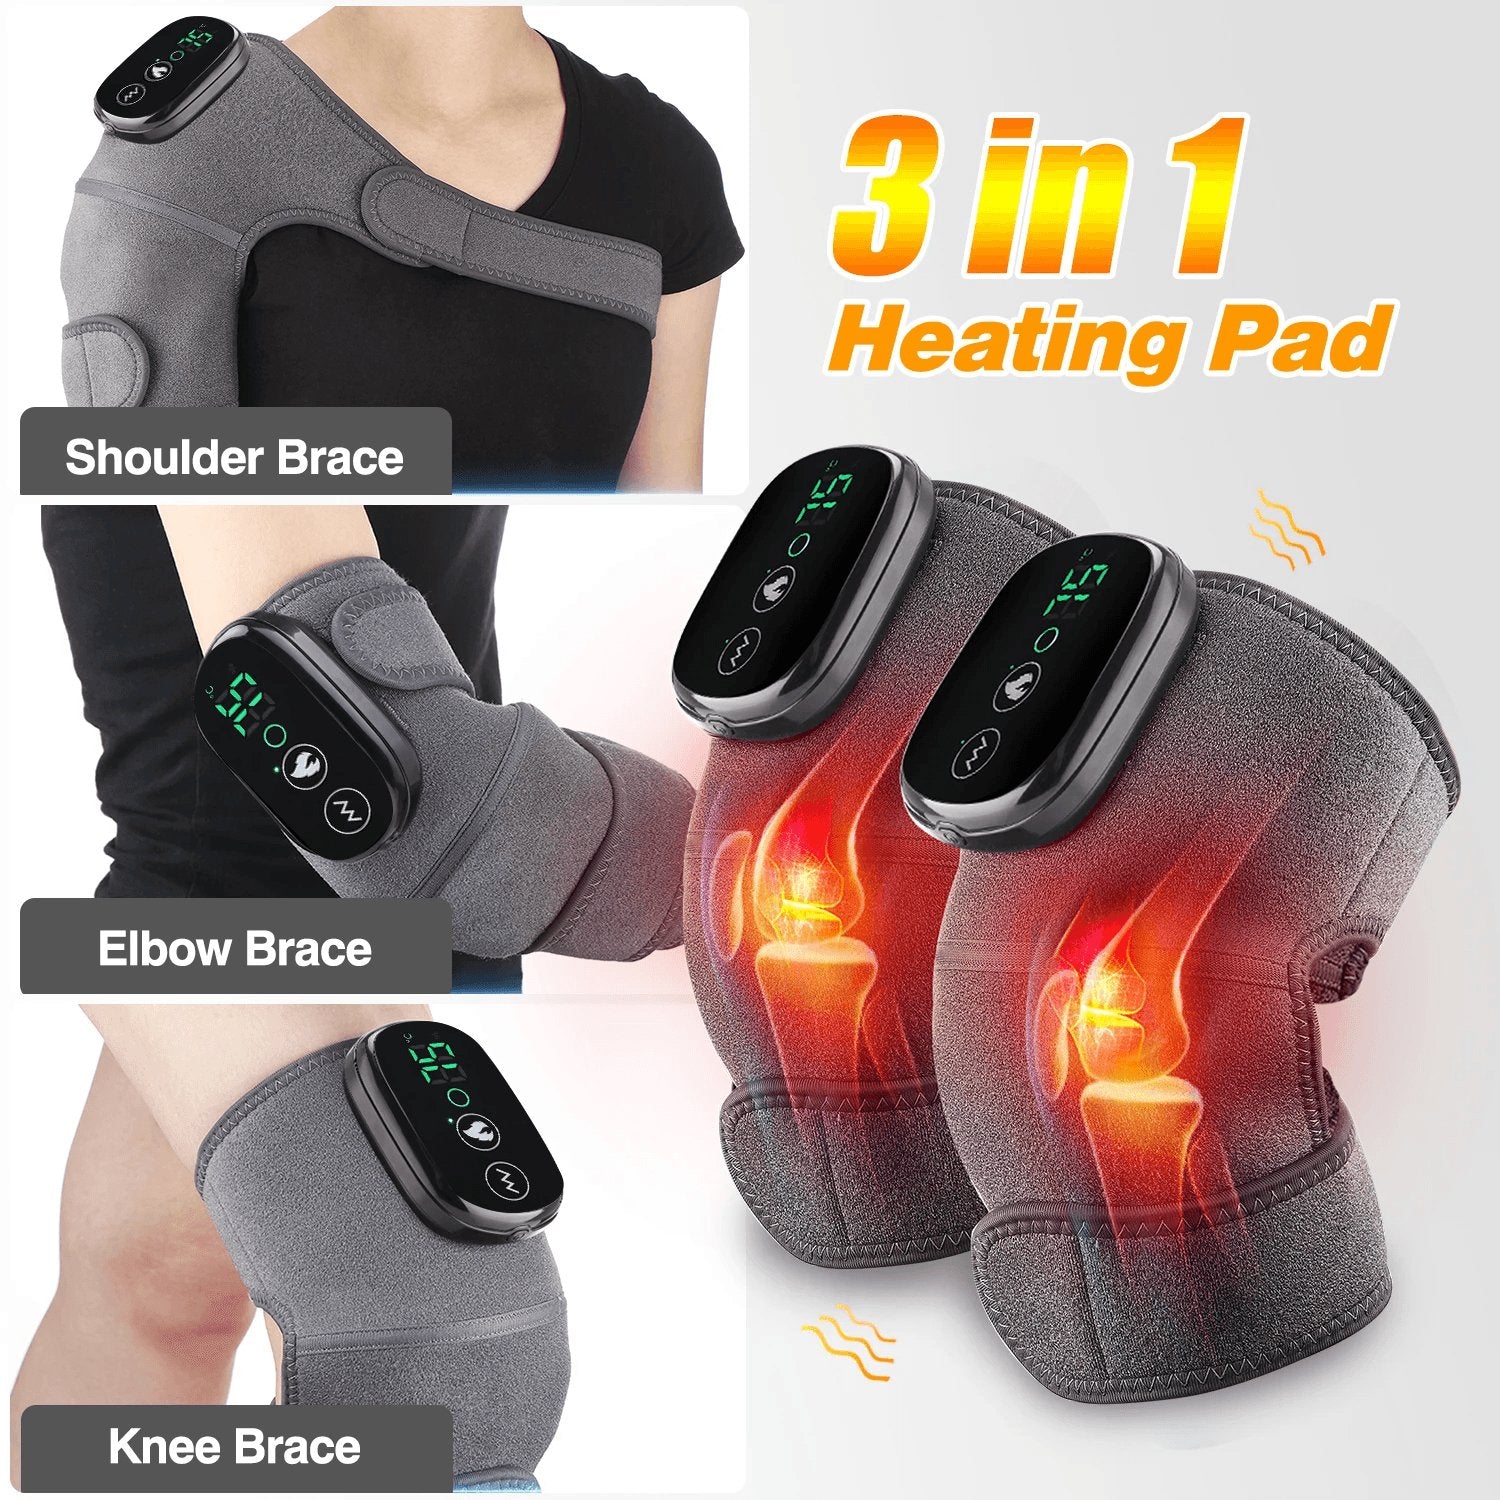 Thermal Knee Massager 3 in 1 Shoulder Knee Elbow Heating Massage Support Brace Rechargeable Vibration Pad Arthritis Pain Relief - Ammpoure Wellbeing